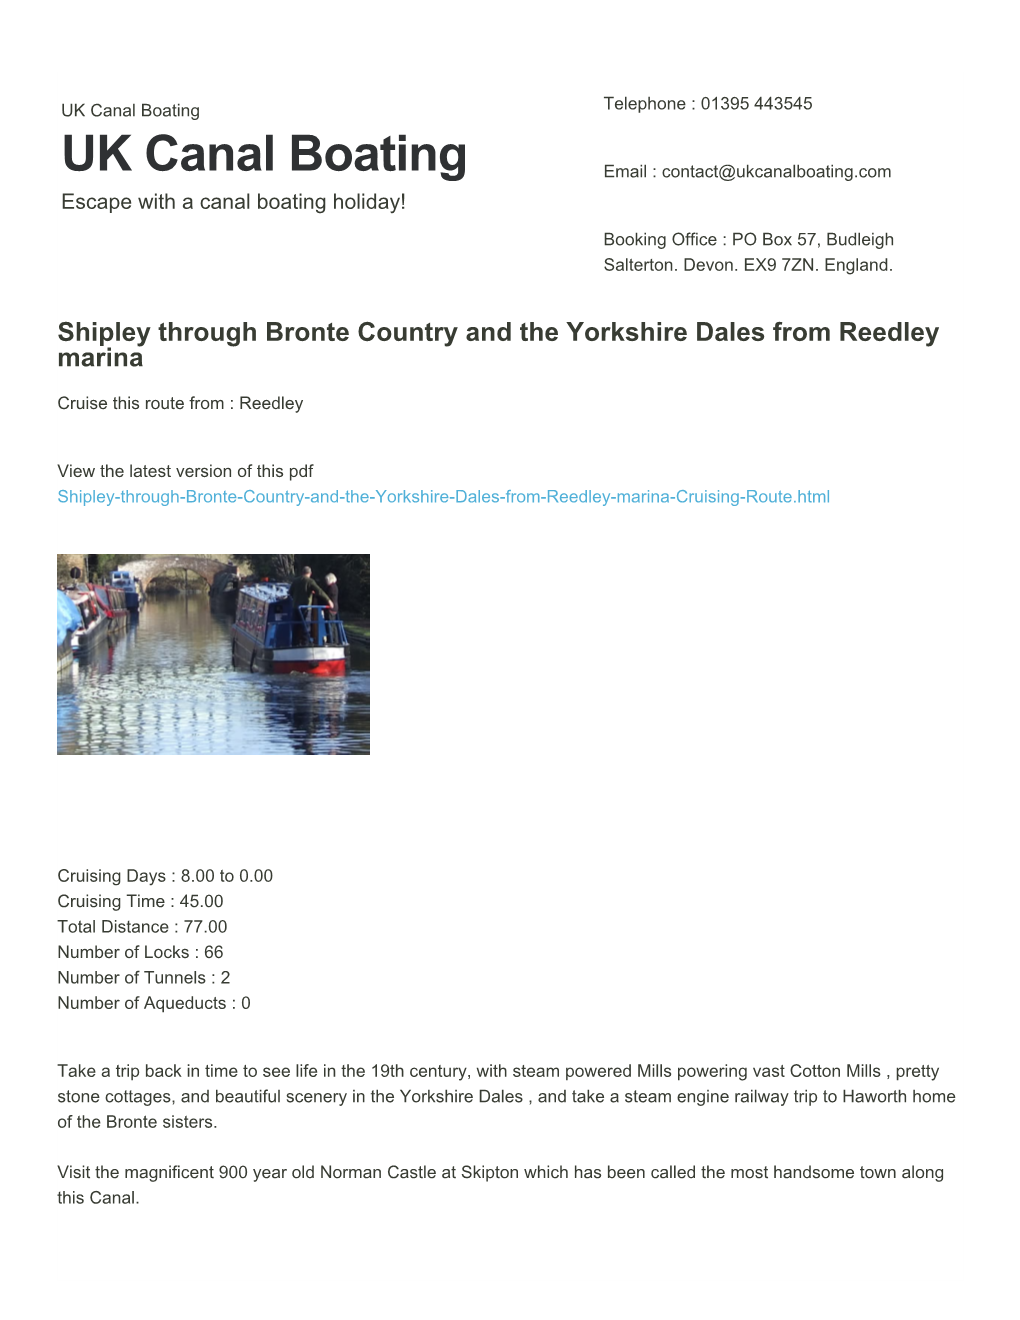 Shipley Through Bronte Country and the Yorkshire Dales from Reedley Marina